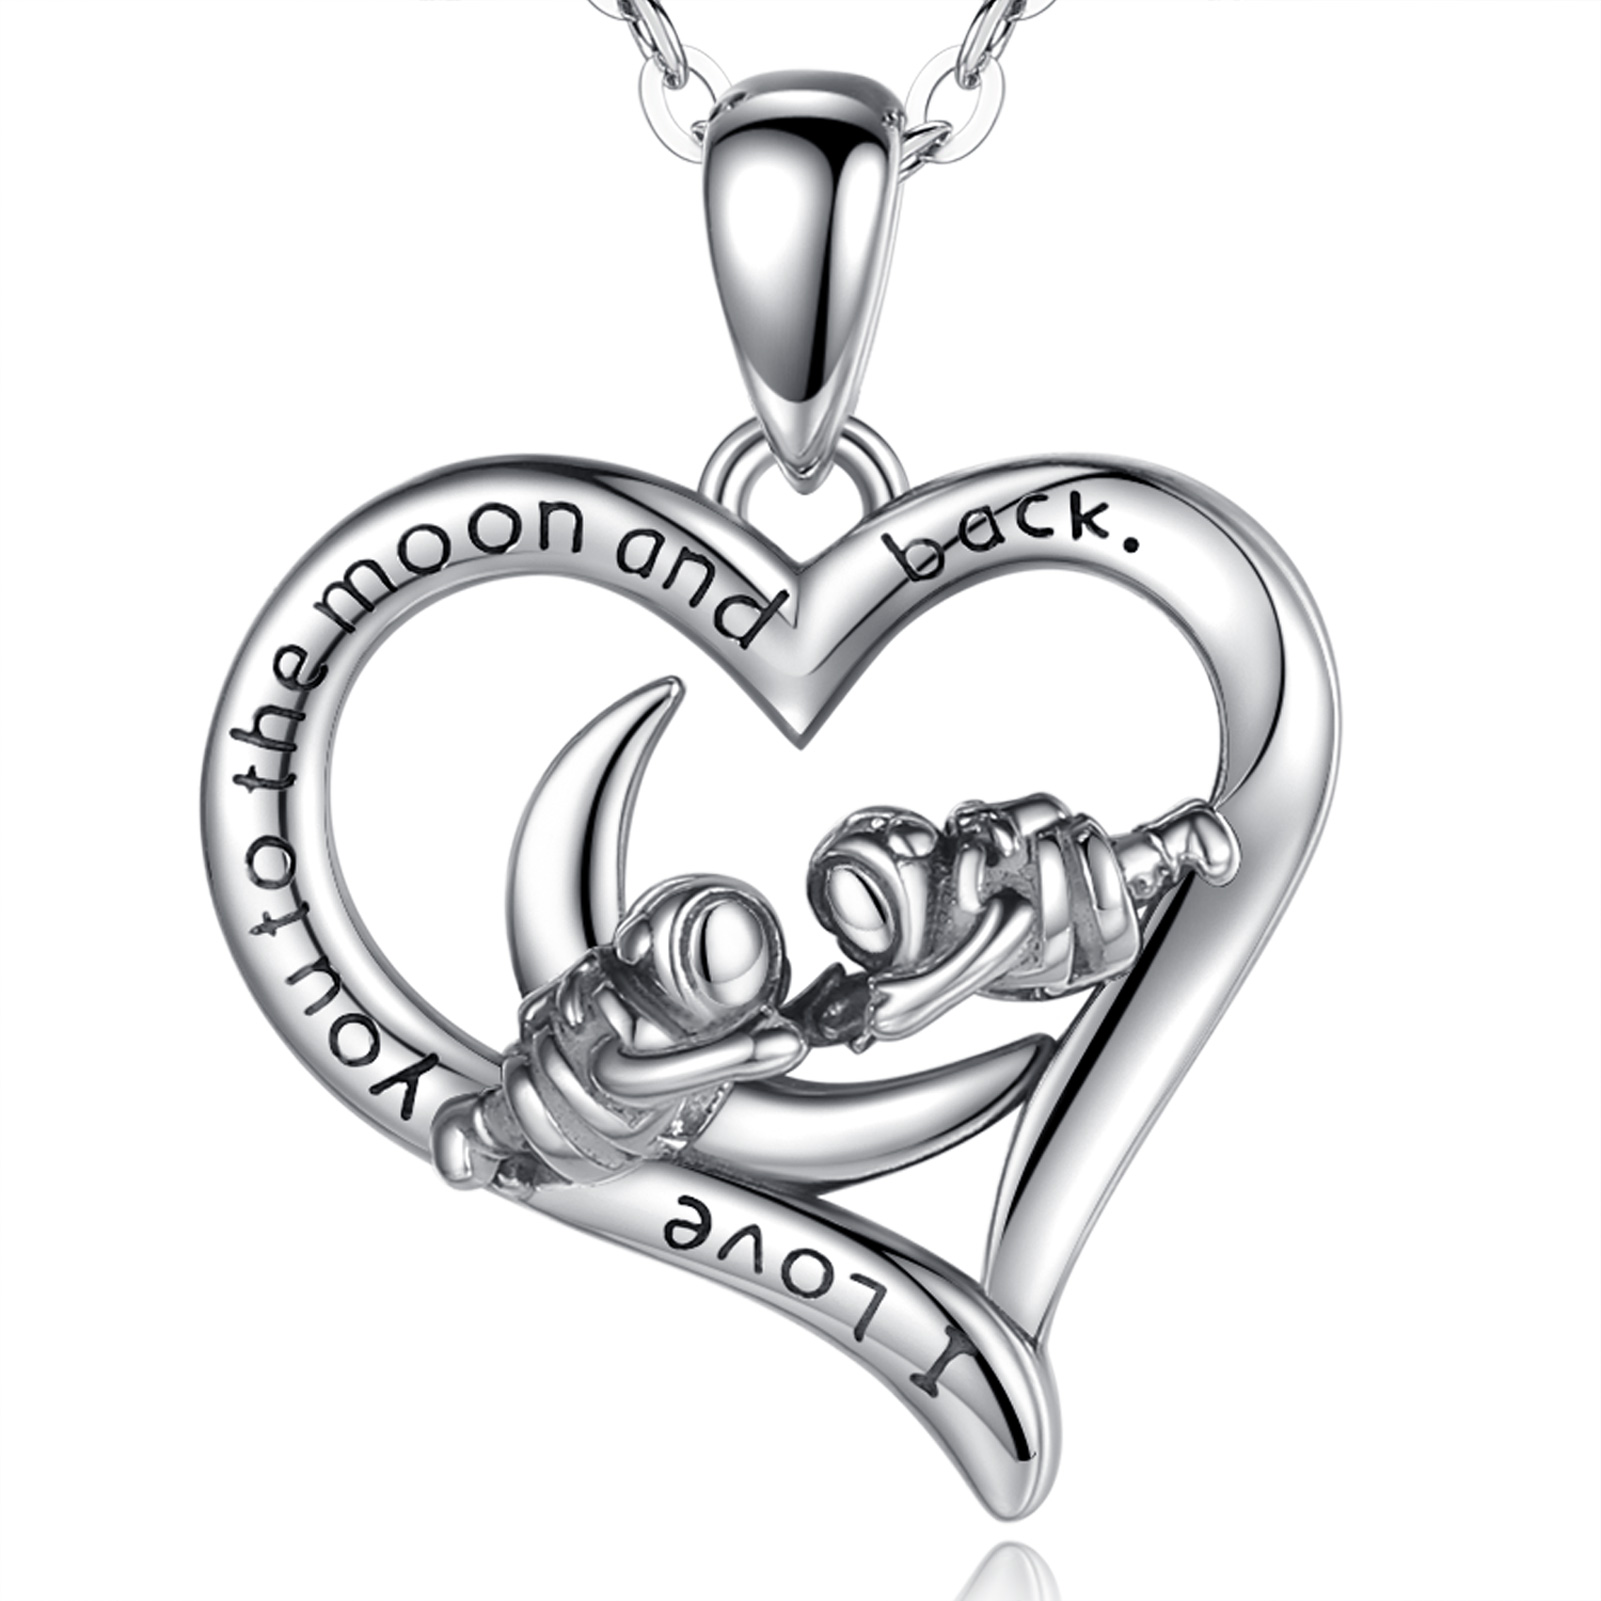 Merryshine Best Friend Gift S925 Sterling Silver Love Heart Astronaut Necklace Pendant Jewelry